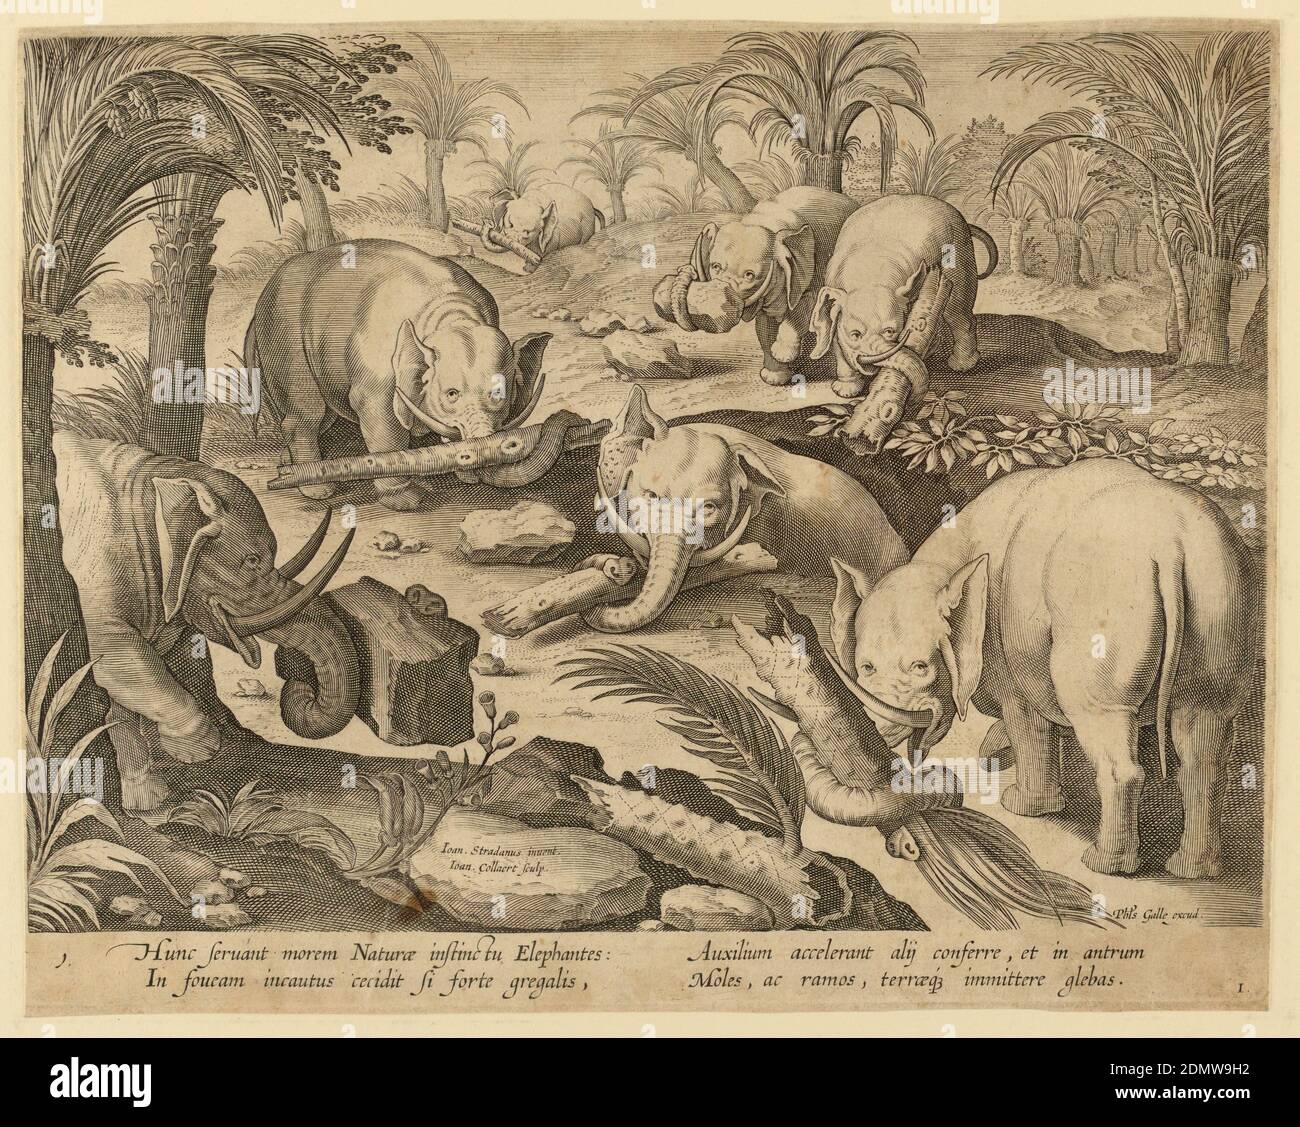 Elephants Helding Each Other out of a Trap, plate 1 from the Venationes Ferarum, Avium, Piscium series, Jan van der Straet, called Stradanus, Flemish, 1523–1605, Jan Collaert II, Flemish, 1560 - 1628, Philips Galle, Flemish, 1537 - 1612, Engraving on paper, Horizontal rectangle. An elephant is trapped in a deep pit, in the middle ground. Other elephants carry stones and tree trunks in an effort to rescue him. Inscribed on stone, near left center: 'Ioan Stradanus invent. / Ioan Collaert Sculp.' At lower right: 'Phls Galle excud.' Below: HUNC SERVANT MOREM NATURAE INSTINCTII ELEPHANTIS Stock Photo